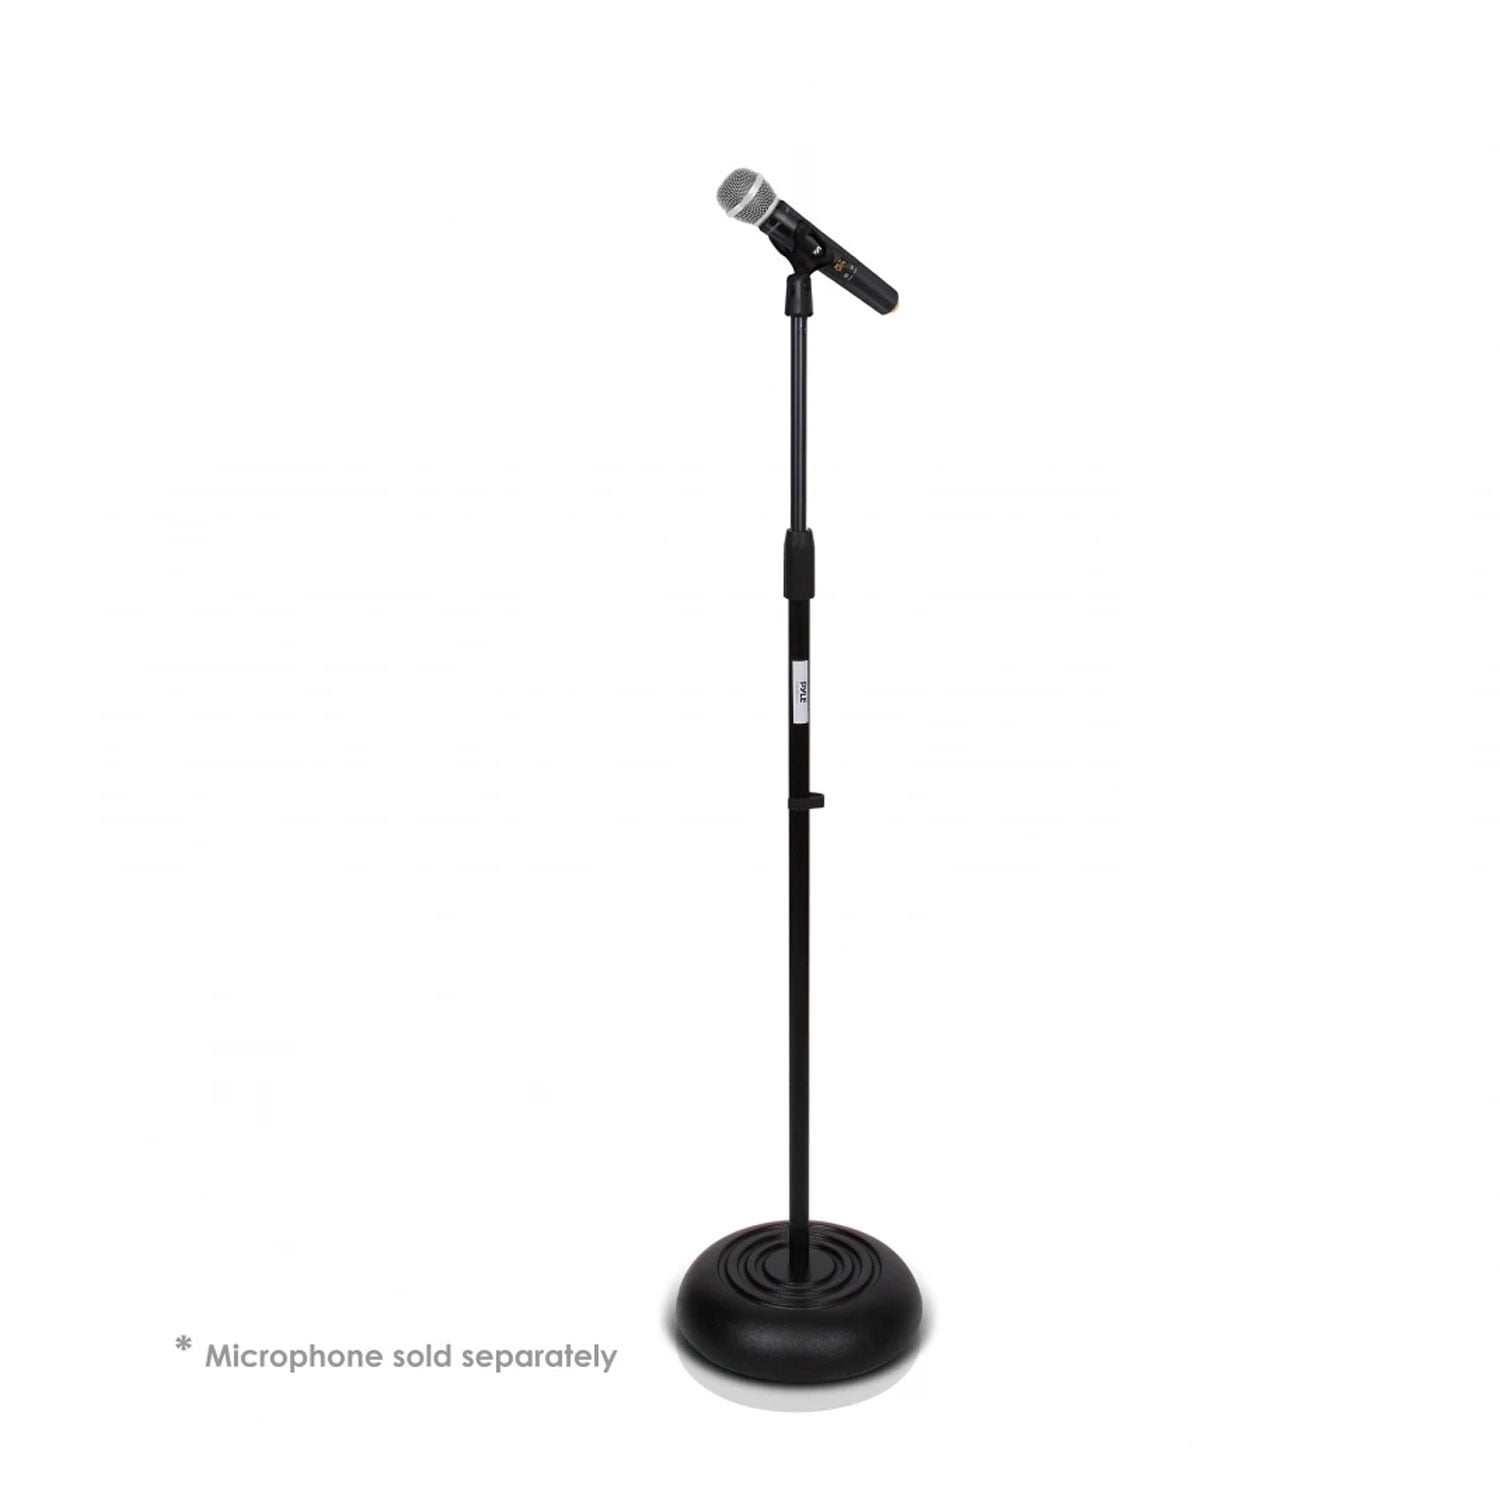 The 7 best podcast microphone stands (2023)